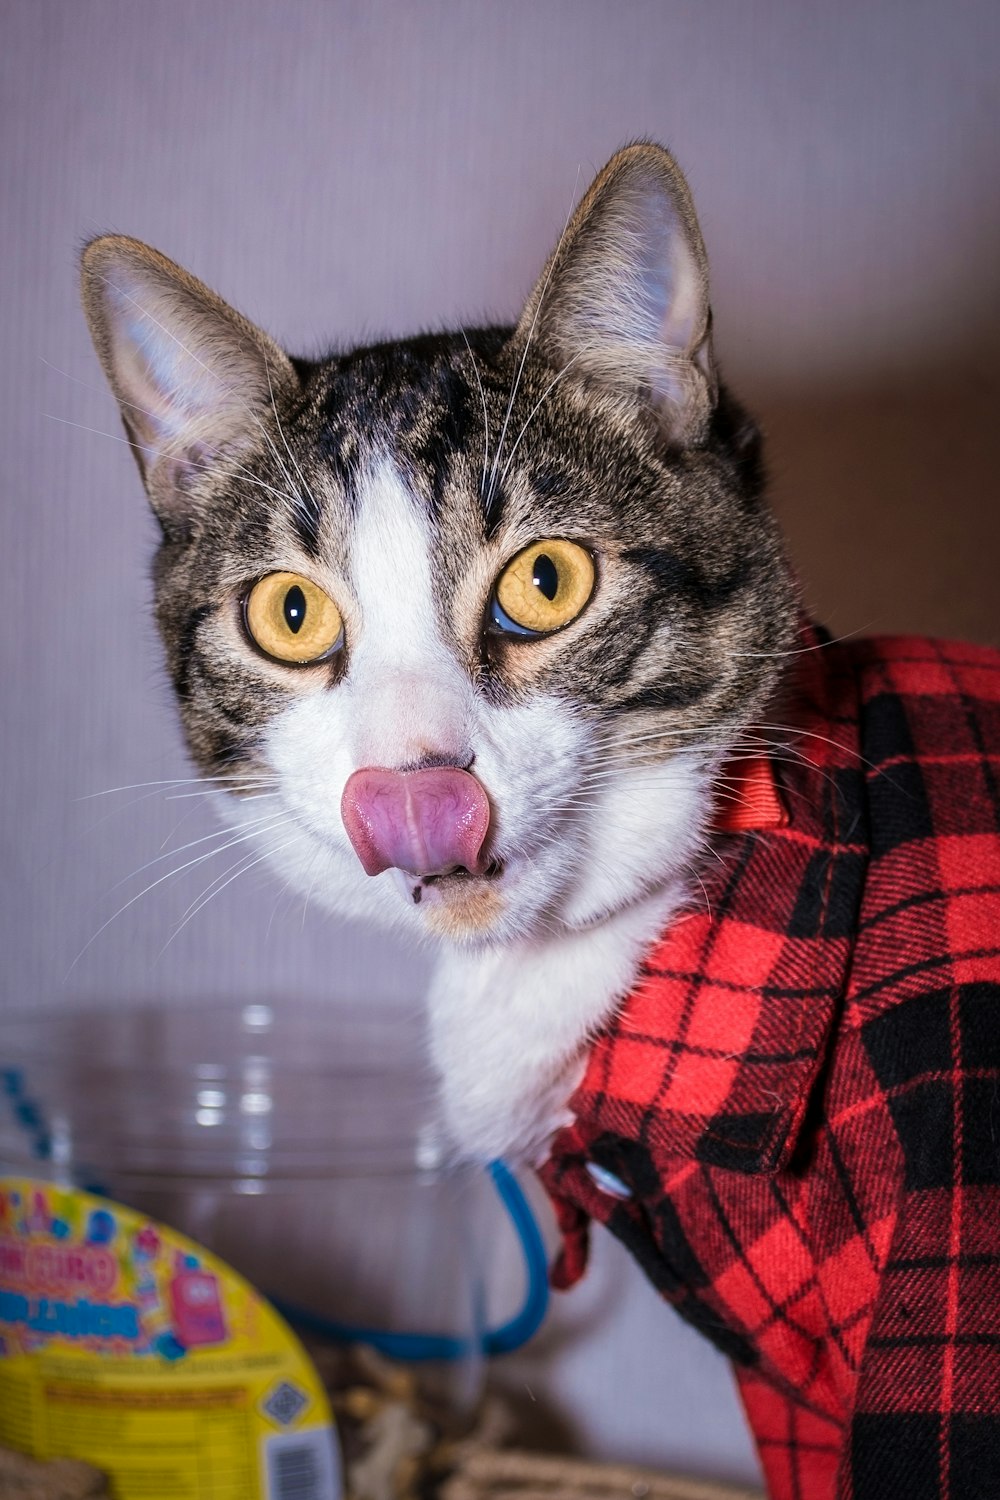 a cat sticking its tongue out while wearing a plaid shirt